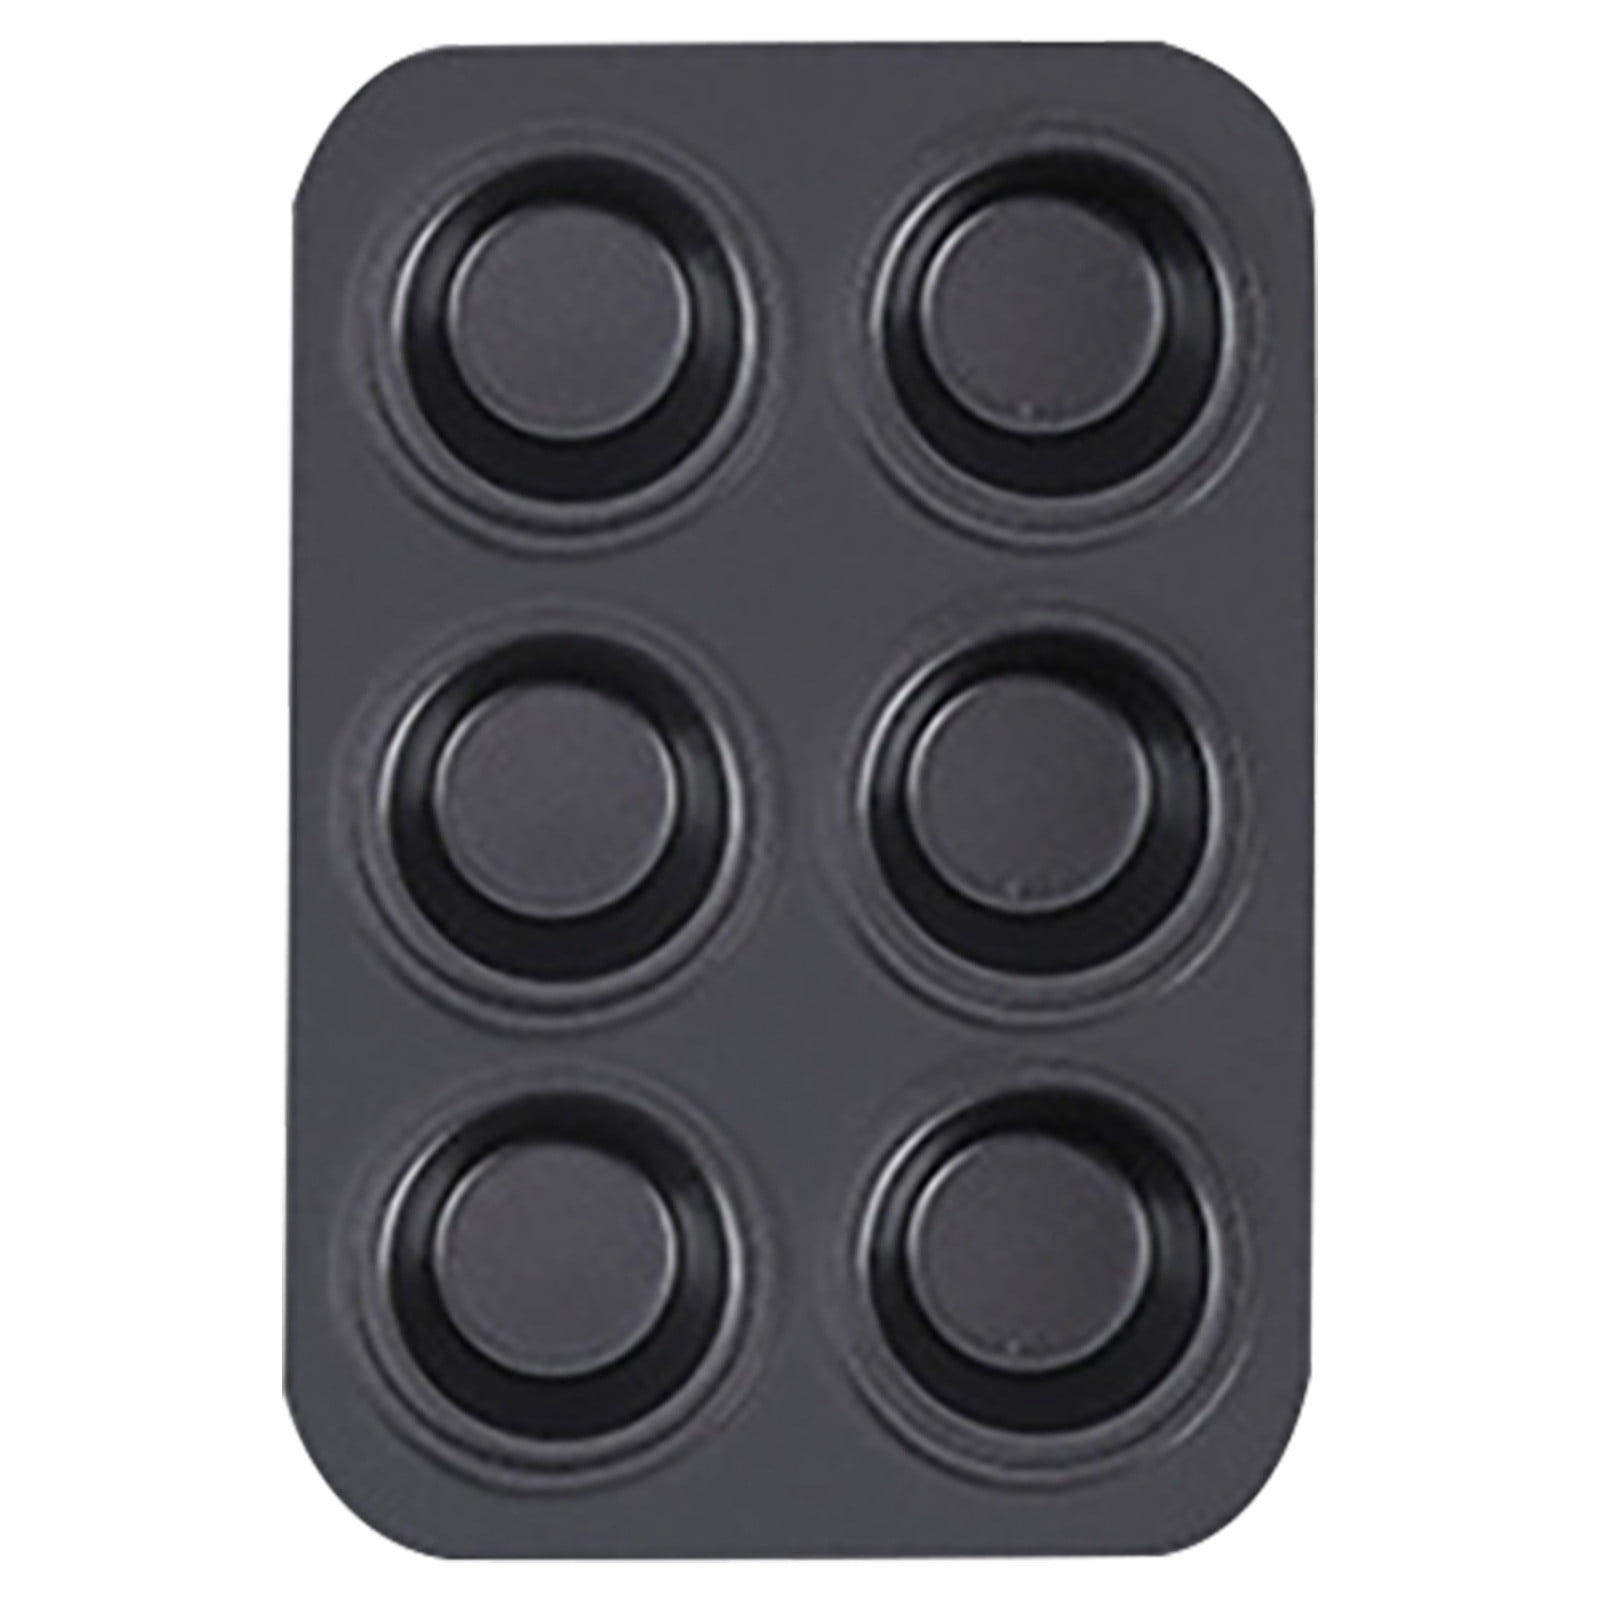 Muffin Pan Clearance, 9 Cup Muffin Tin Cupcake Pan Tray with